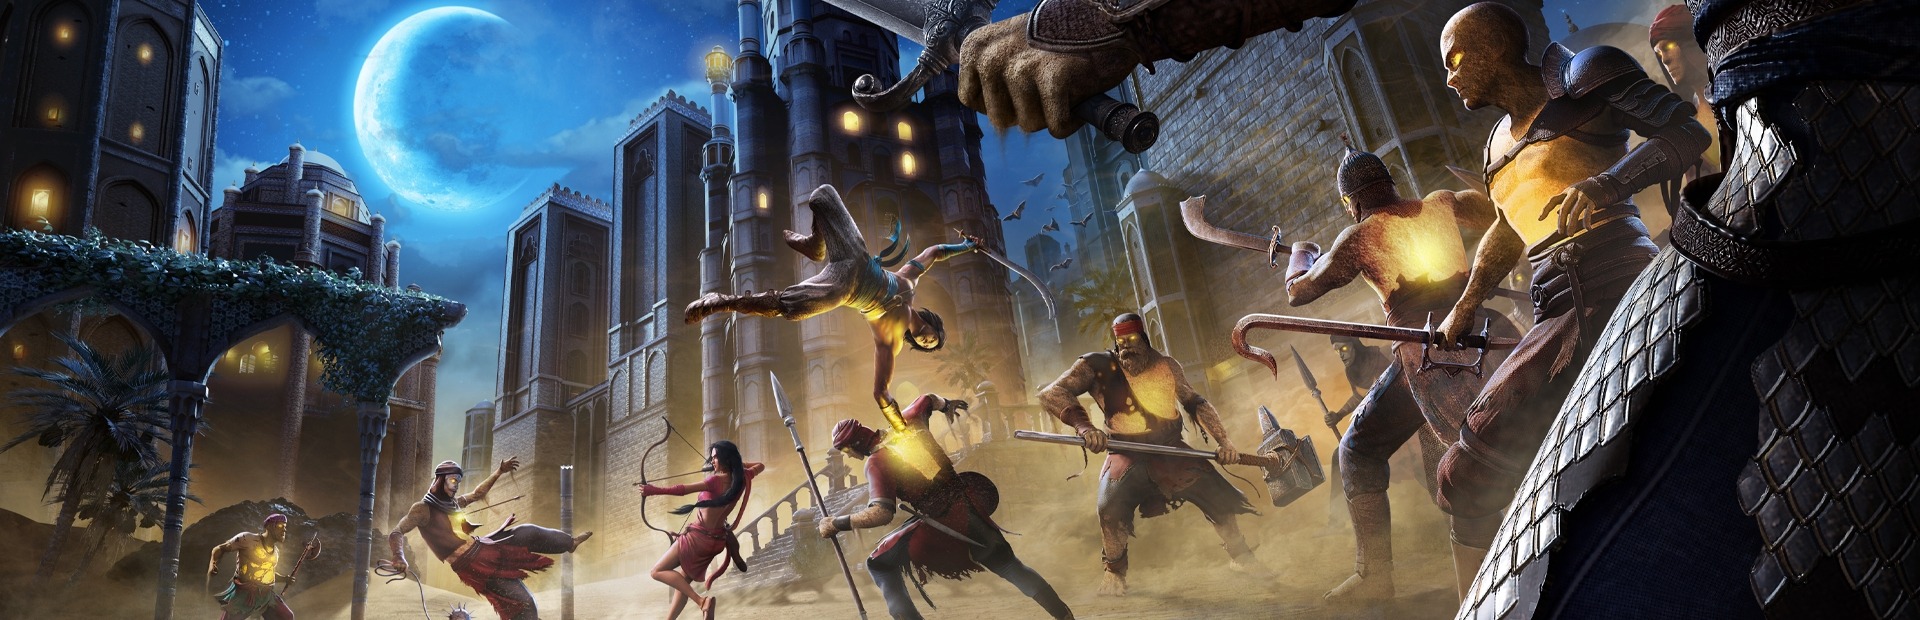 Banner Prince of Persia: The Sands of Time Renovado